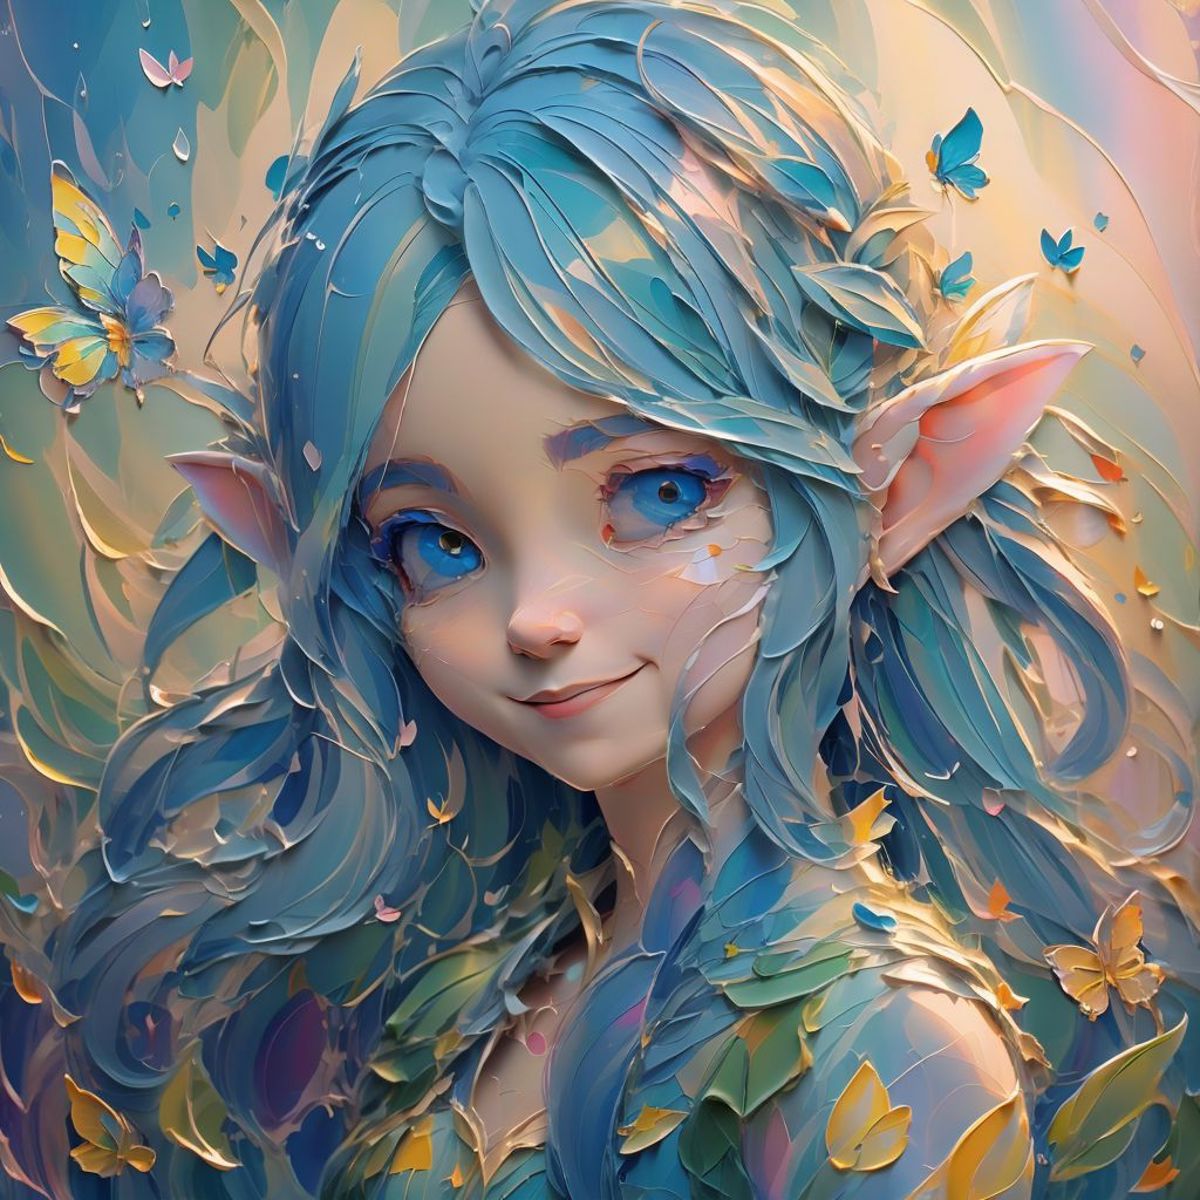 A beautiful blue and purple girl with butterflies and flowers around her.